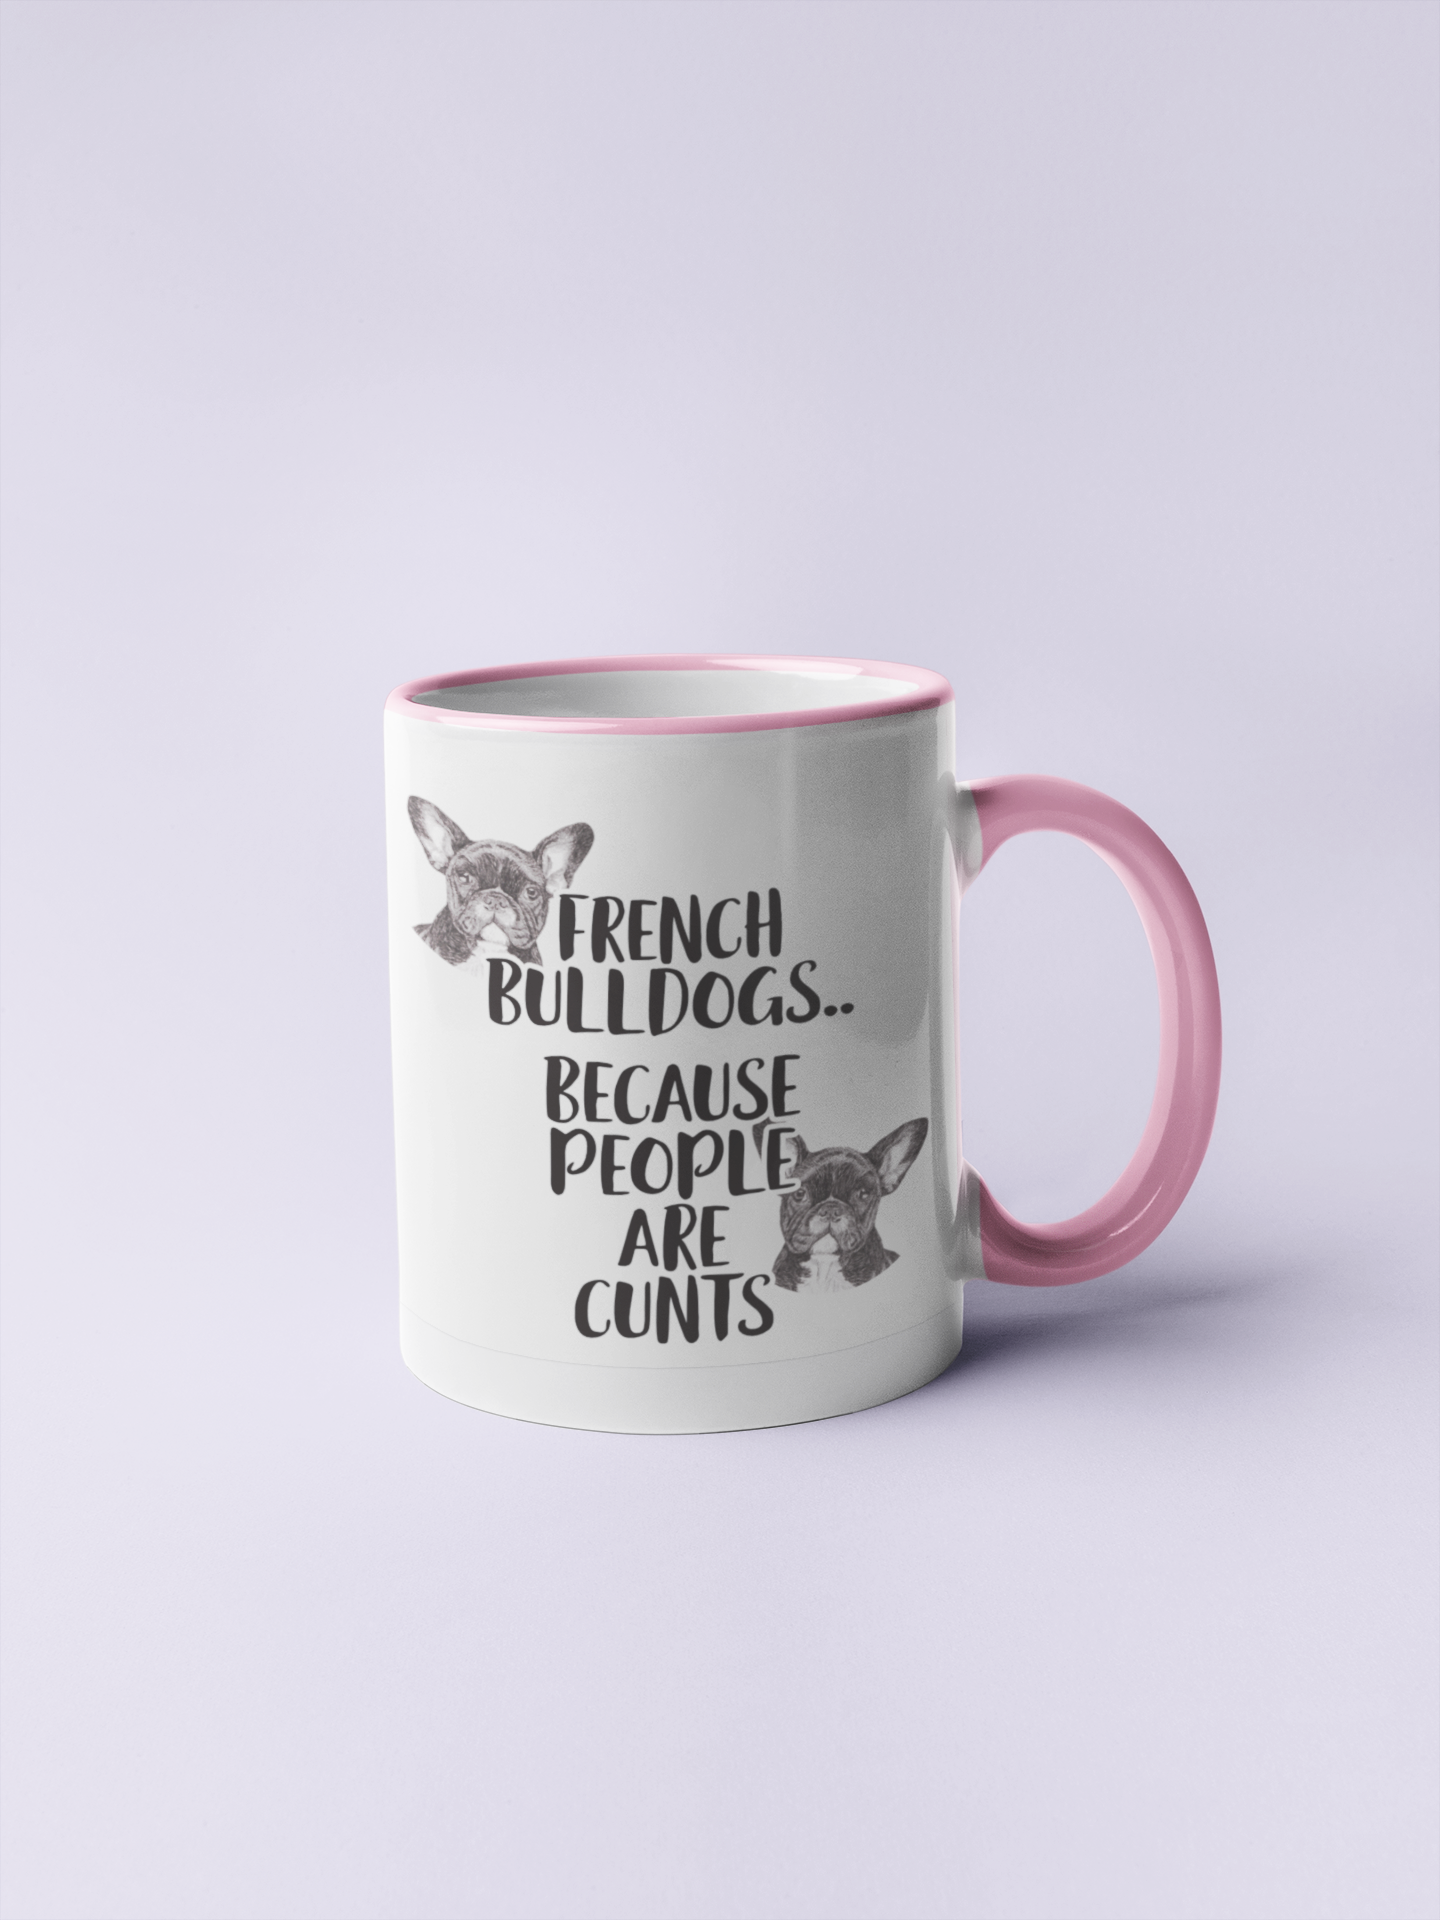 White mug with a pink handle and inner with the words french bulldogs.. because people are c*nts. To the top left and bottom write of the wording are two sketches french bulldogs.